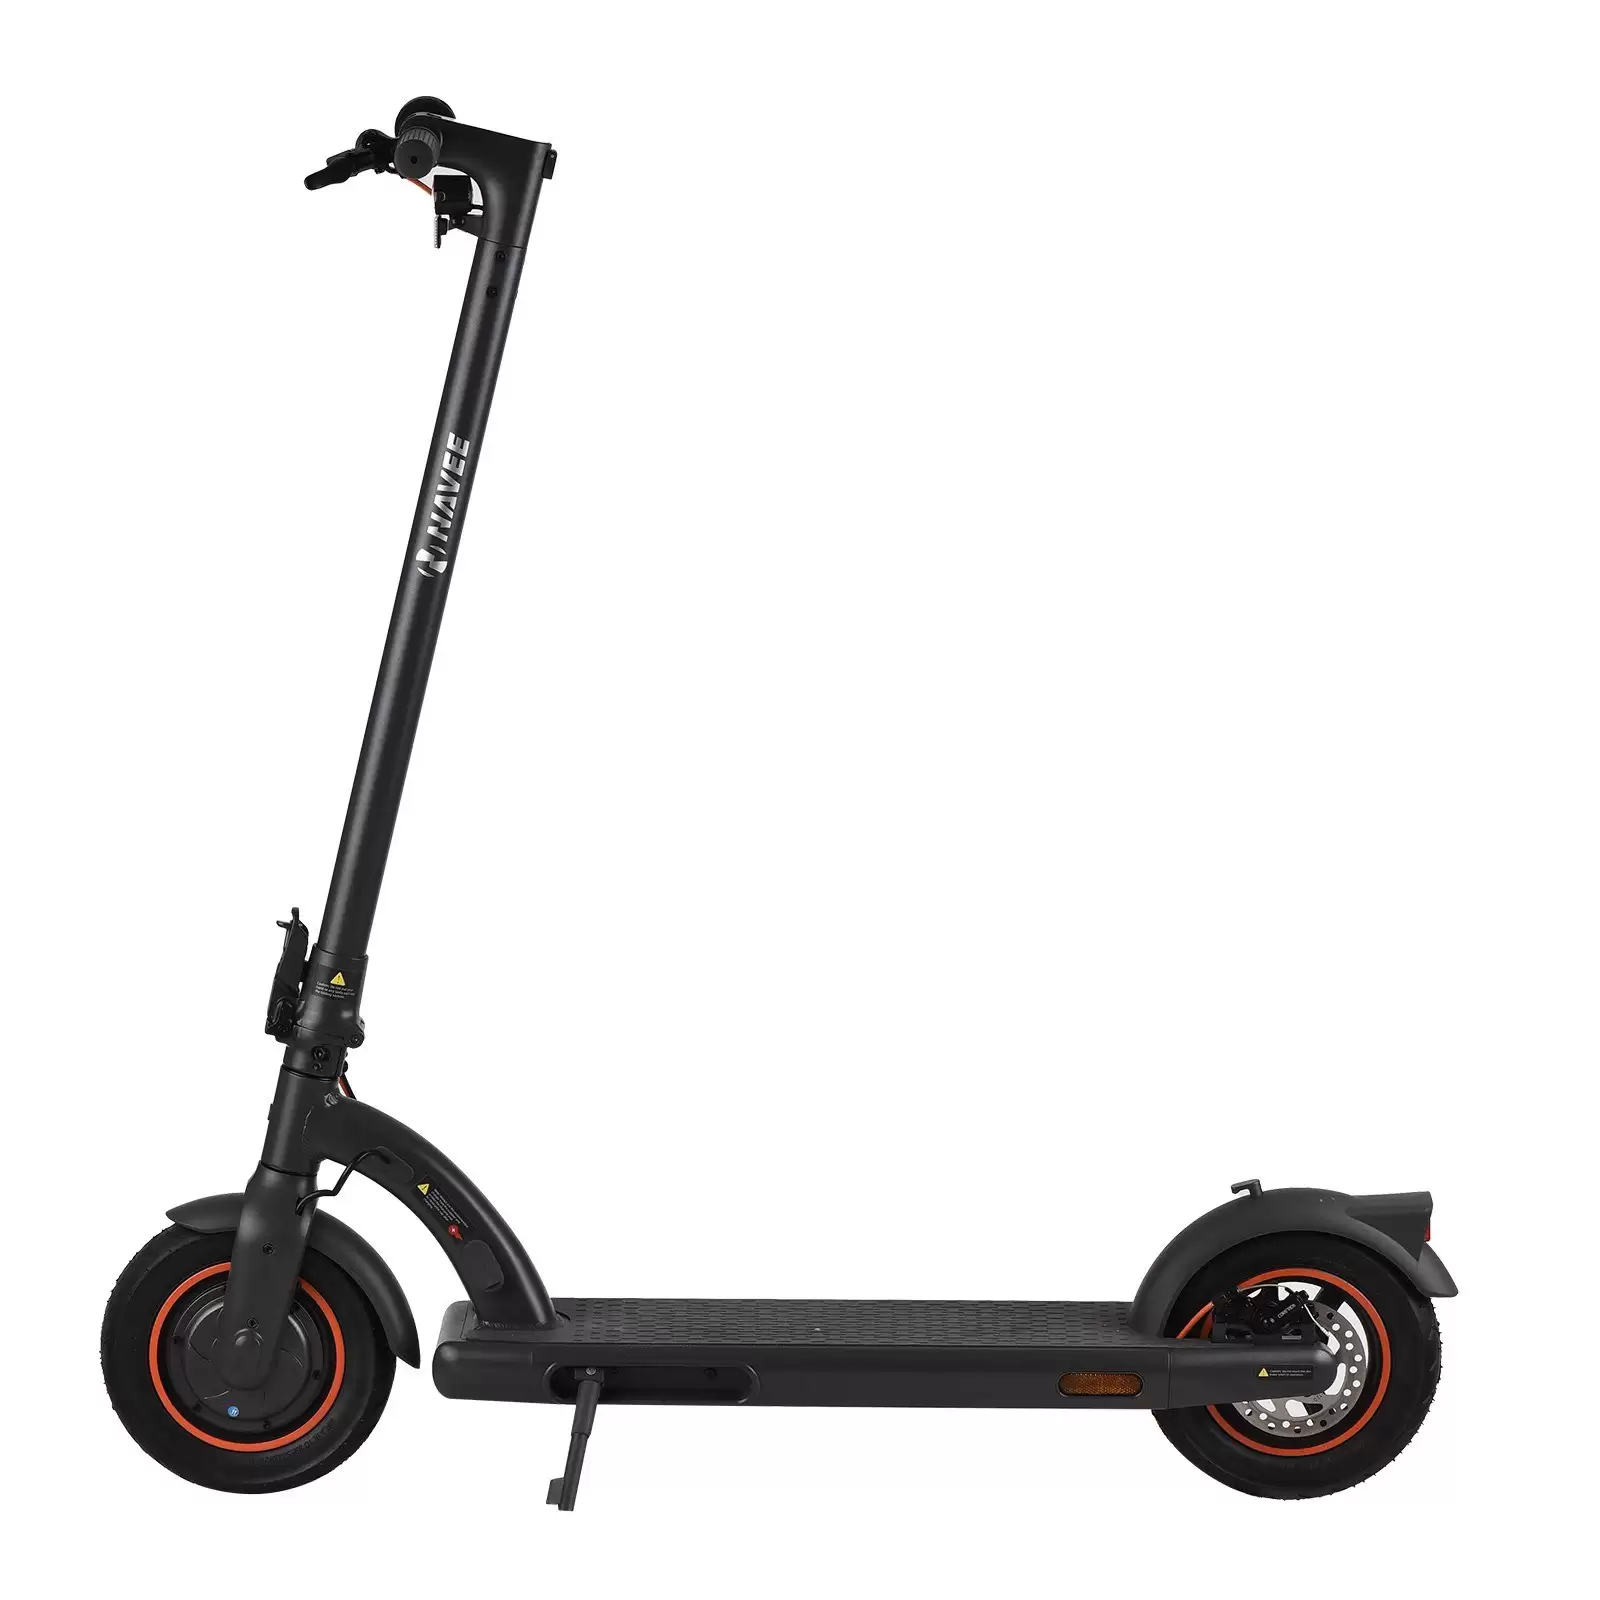 Order In Just €239 Navee N40 350w Brushless Motor Electric Scooter With This Discount Coupon At Cafago